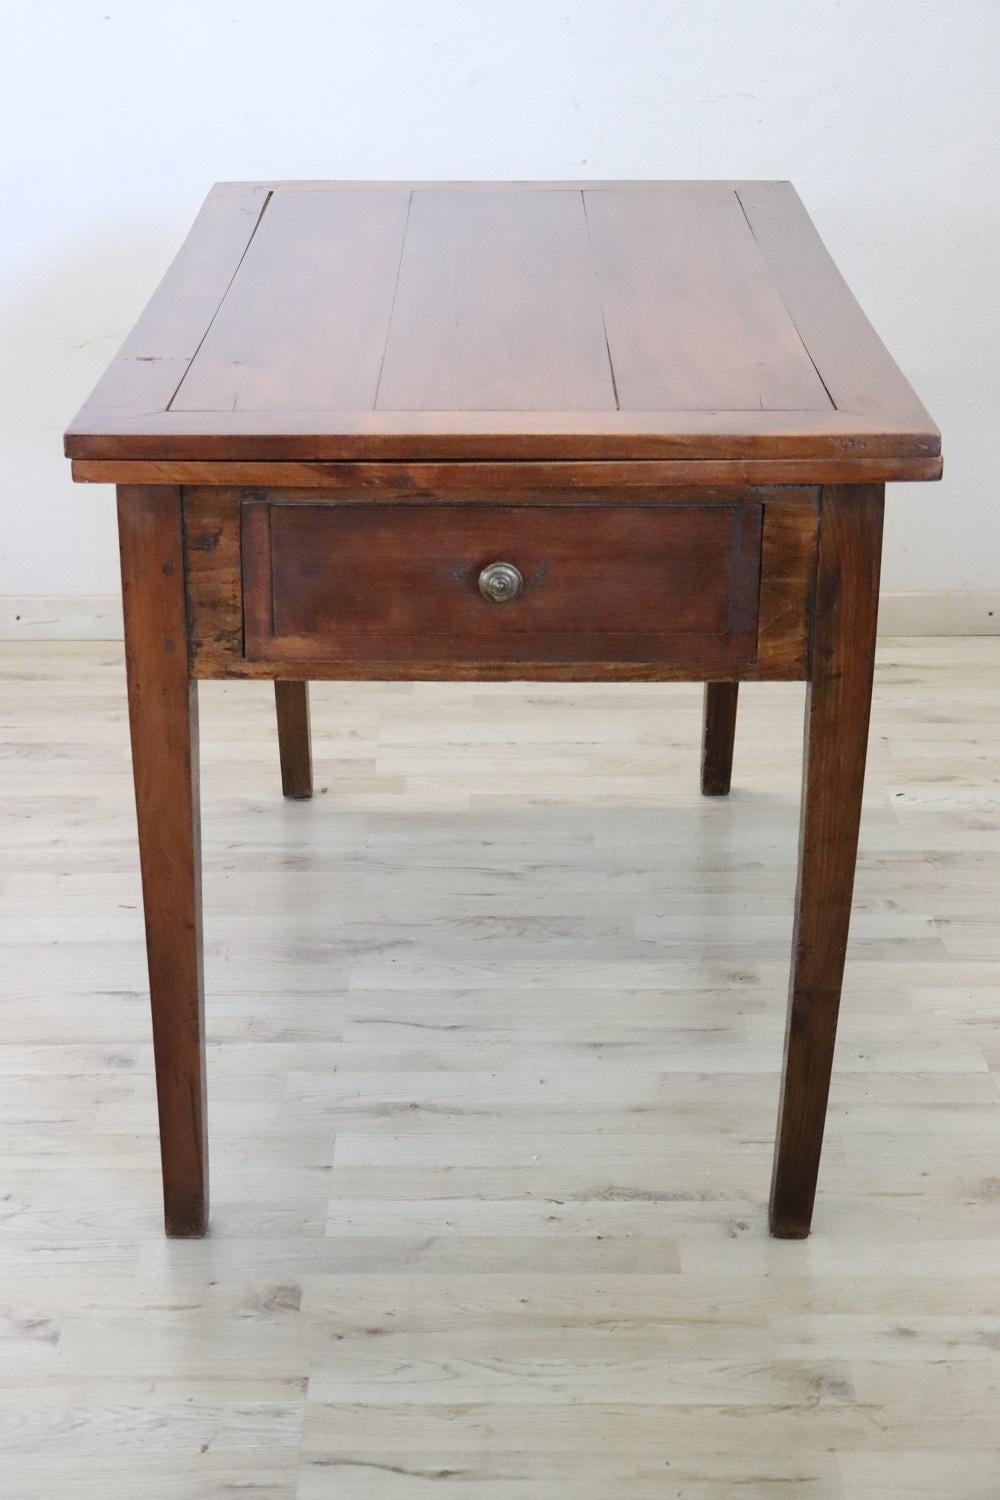 Beautiful very nice Italian solid poplar and cherry wood kitchen table, 1850s. The table is very simple and linear, characterized by solid straight legs. Equipped with a drawer and a practical internal compartment. The top of this table opens like a